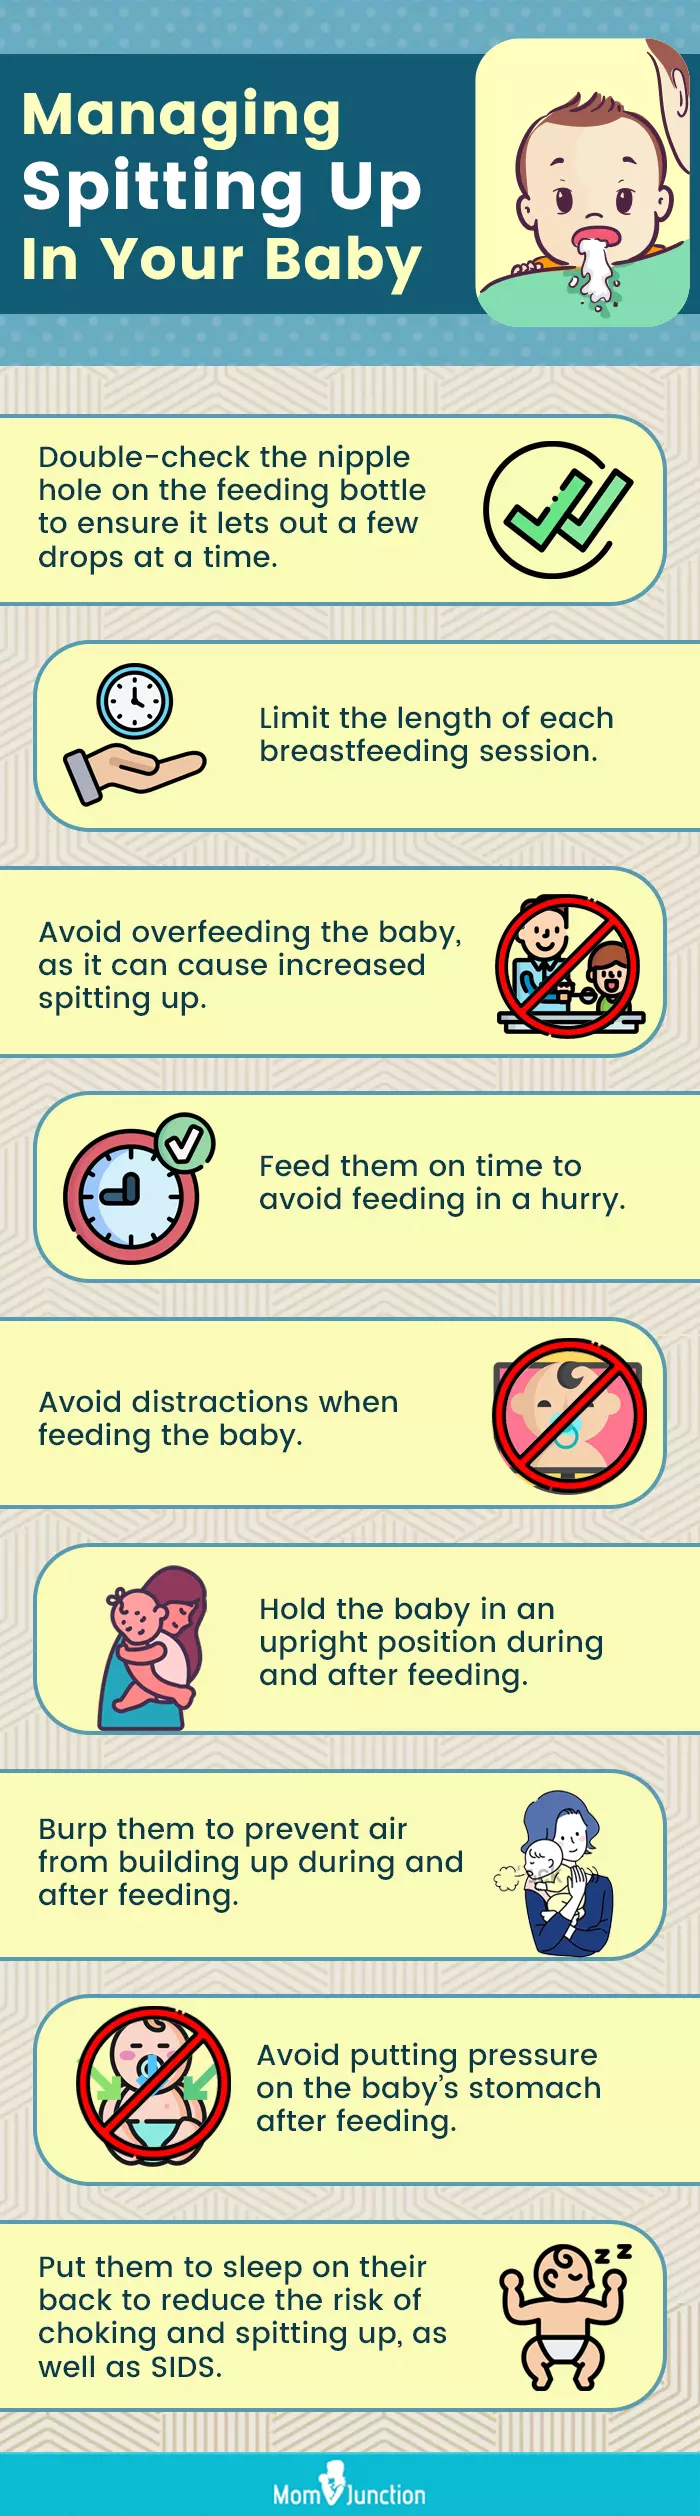 managing spitting up in your baby (infographic)